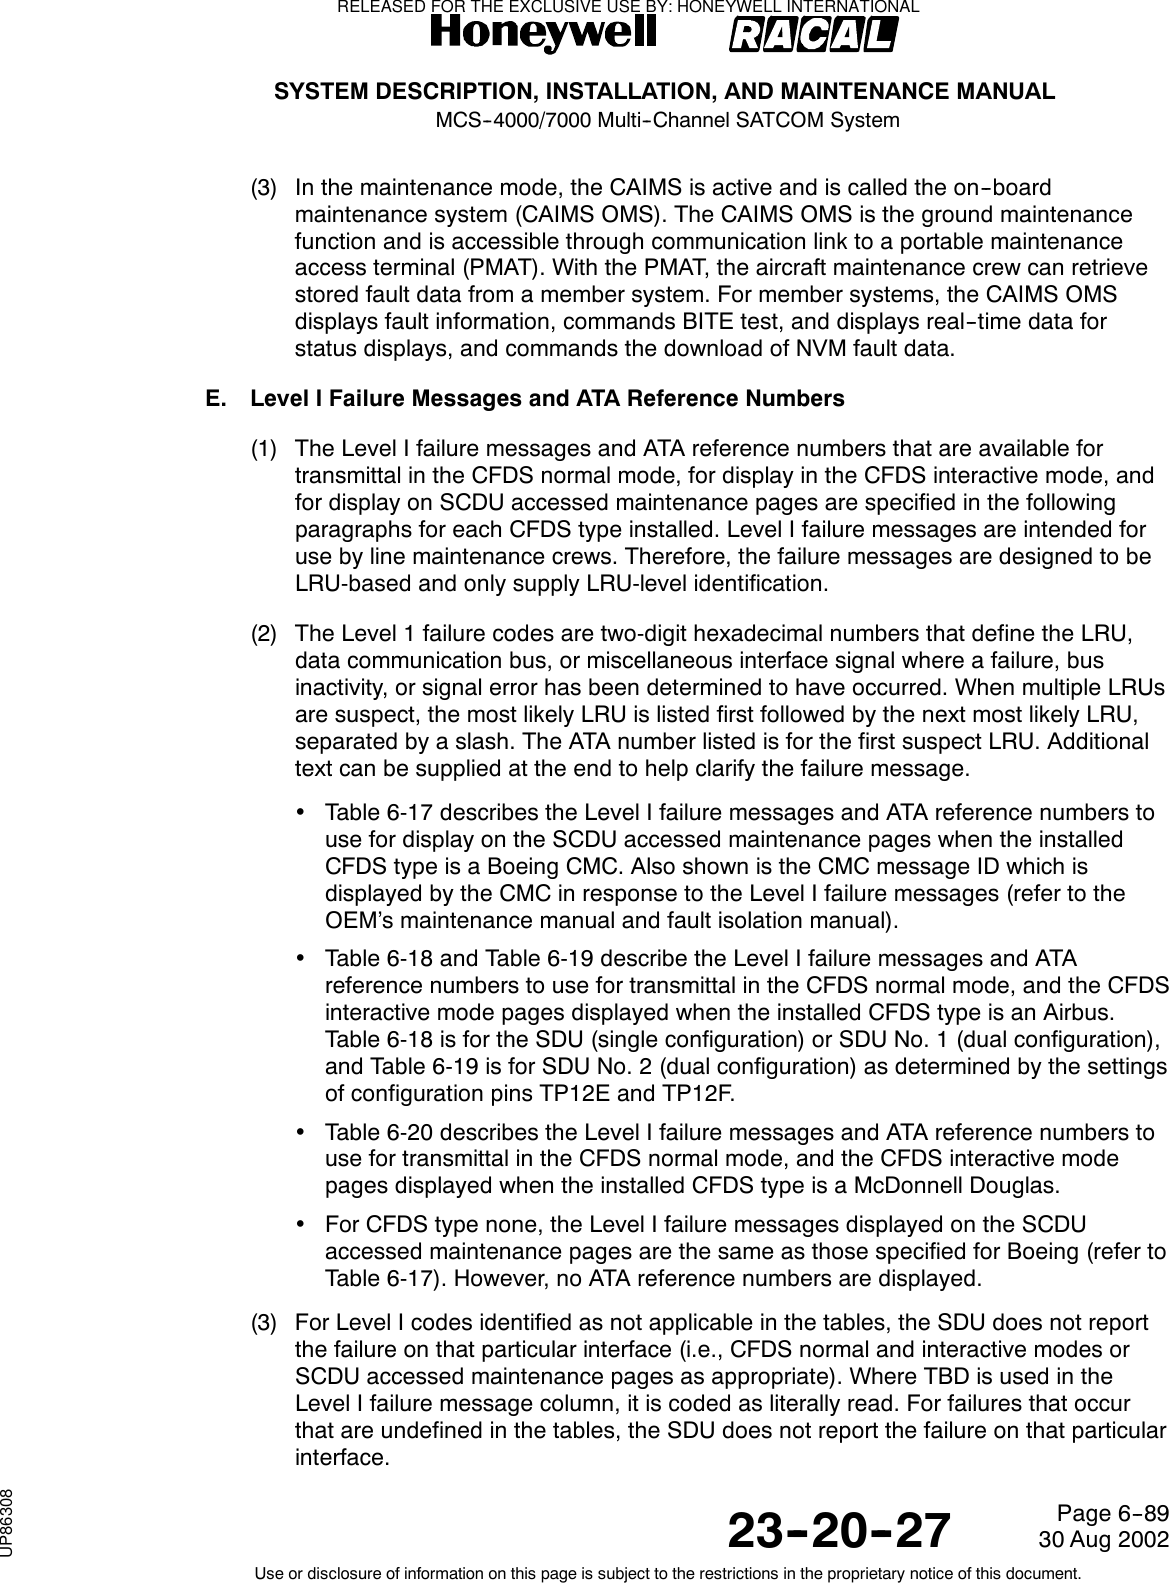 SYSTEM DESCRIPTION, INSTALLATION, AND MAINTENANCE MANUALMCS--4000/7000 Multi--Channel SATCOM System23--20--2730 Aug 2002Use or disclosure of information on this page is subject to the restrictions in the proprietary notice of this document.Page 6--89(3) In the maintenance mode, the CAIMS is active and is called the on--boardmaintenance system (CAIMS OMS). The CAIMS OMS is the ground maintenancefunction and is accessible through communication link to a portable maintenanceaccess terminal (PMAT). With the PMAT, the aircraft maintenance crew can retrievestored fault data from a member system. For member systems, the CAIMS OMSdisplays fault information, commands BITE test, and displays real--time data forstatus displays, and commands the download of NVM fault data.E. Level I Failure Messages and ATA Reference Numbers(1) The Level I failure messages and ATA reference numbers that are available fortransmittal in the CFDS normal mode, for display in the CFDS interactive mode, andfor display on SCDU accessed maintenance pages are specified in the followingparagraphs for each CFDS type installed. Level I failure messages are intended foruse by line maintenance crews. Therefore, the failure messages are designed to beLRU-based and only supply LRU-level identification.(2) The Level 1 failure codes are two-digit hexadecimal numbers that define the LRU,data communication bus, or miscellaneous interface signal where a failure, businactivity, or signal error has been determined to have occurred. When multiple LRUsare suspect, the most likely LRU is listed first followed by the next most likely LRU,separated by a slash. The ATA number listed is for the first suspect LRU. Additionaltext can be supplied at the end to help clarify the failure message.•Table 6-17 describes the Level I failure messages and ATA reference numbers touse for display on the SCDU accessed maintenance pages when the installedCFDS type is a Boeing CMC. Also shown is the CMC message ID which isdisplayed by the CMC in response to the Level I failure messages (refer to theOEM’s maintenance manual and fault isolation manual).•Table 6-18 and Table 6-19 describe the Level I failure messages and ATAreference numbers to use for transmittal in the CFDS normal mode, and the CFDSinteractivemodepagesdisplayedwhentheinstalledCFDStypeisanAirbus.Table 6-18 is for the SDU (single configuration) or SDU No. 1 (dual configuration),and Table 6-19 is for SDU No. 2 (dual configuration) as determined by the settingsof configuration pins TP12E and TP12F.•Table 6-20 describes the Level I failure messages and ATA reference numbers touse for transmittal in the CFDS normal mode, and the CFDS interactive modepages displayed when the installed CFDS type is a McDonnell Douglas.•For CFDS type none, the Level I failure messages displayed on the SCDUaccessed maintenance pages are the same as those specified for Boeing (refer toTable 6-17). However, no ATA reference numbers are displayed.(3) For Level I codes identified as not applicable in the tables, the SDU does not reportthe failure on that particular interface (i.e., CFDS normal and interactive modes orSCDU accessed maintenance pages as appropriate). Where TBD is used in theLevel I failure message column, it is coded as literally read. For failures that occurthat are undefined in the tables, the SDU does not report the failure on that particularinterface.RELEASED FOR THE EXCLUSIVE USE BY: HONEYWELL INTERNATIONALUP86308